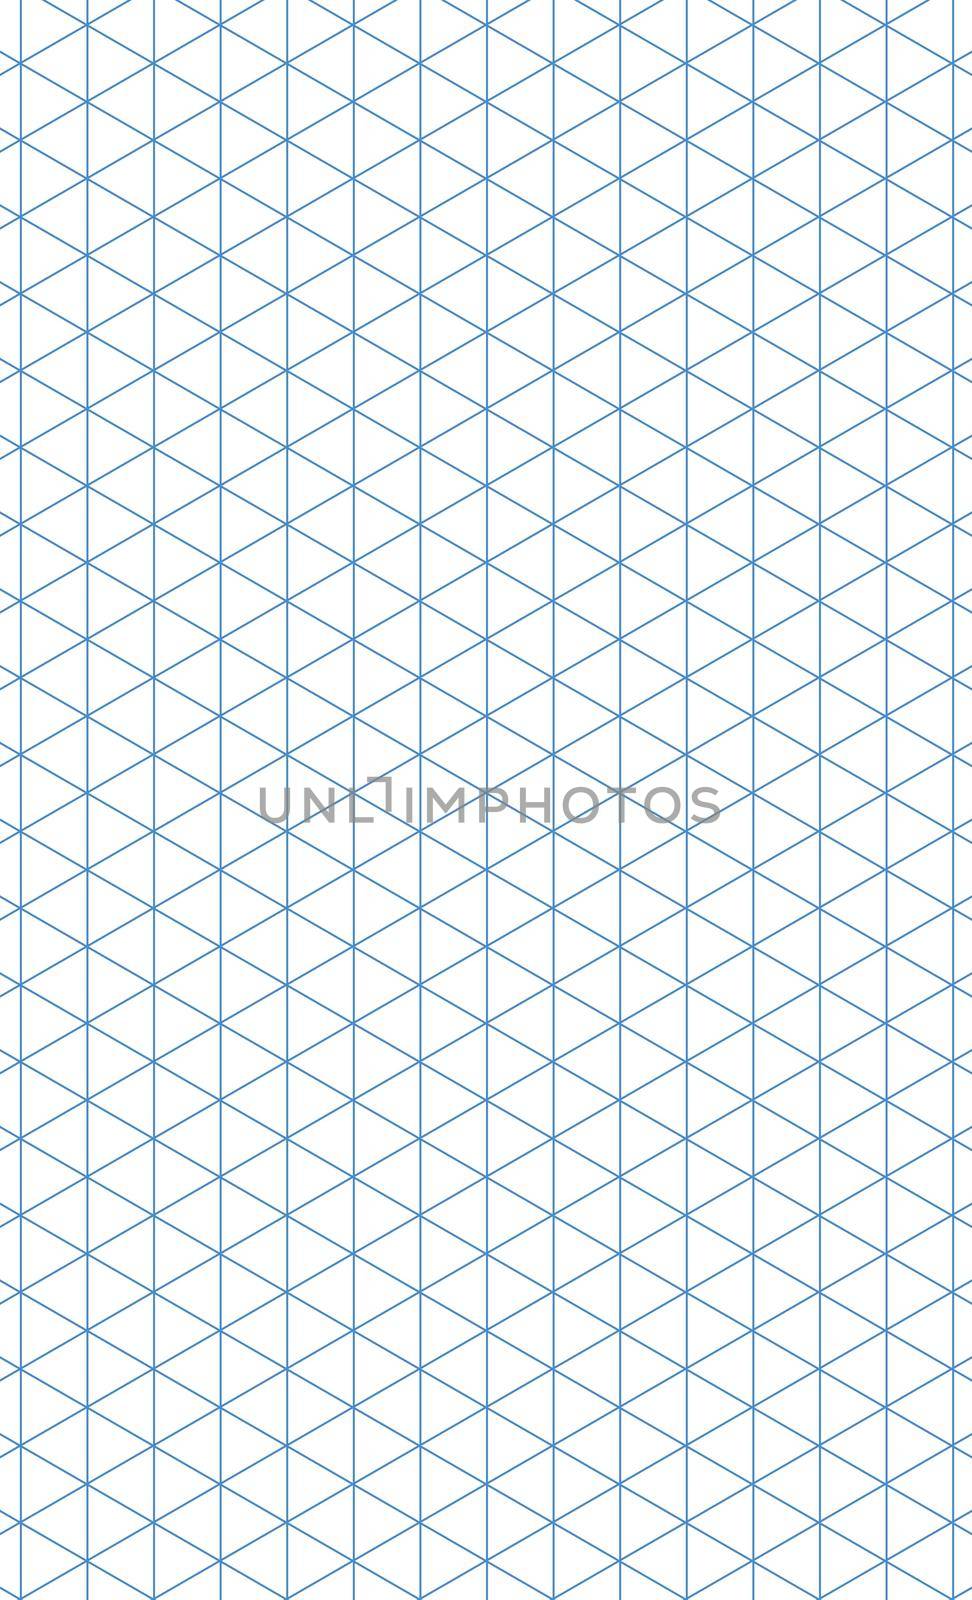 Graph paper. Printable isometric color grid paper with color lines. Geometric background for school, textures, notebook, diary, notes, print, books. Realistic lined paper blank size Legal.